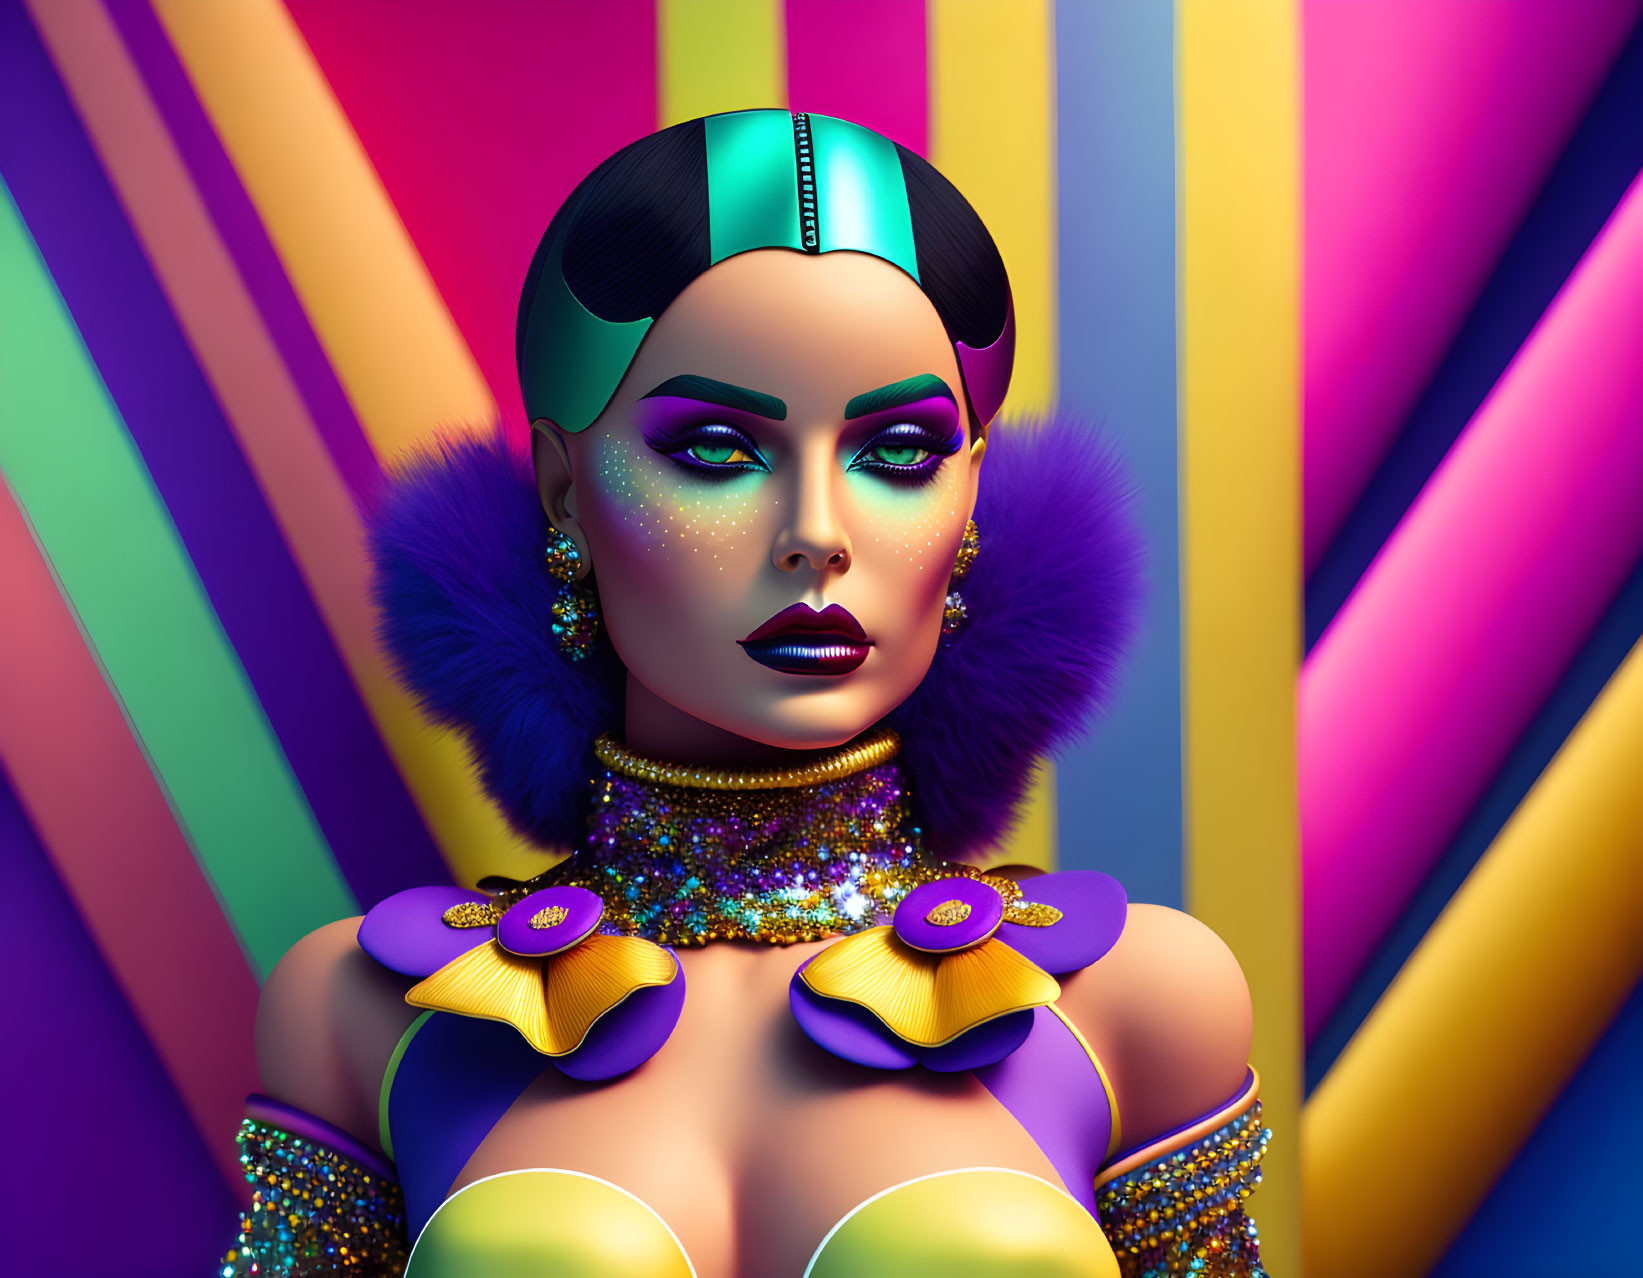 Vibrant digital artwork of woman with colorful makeup and abstract background